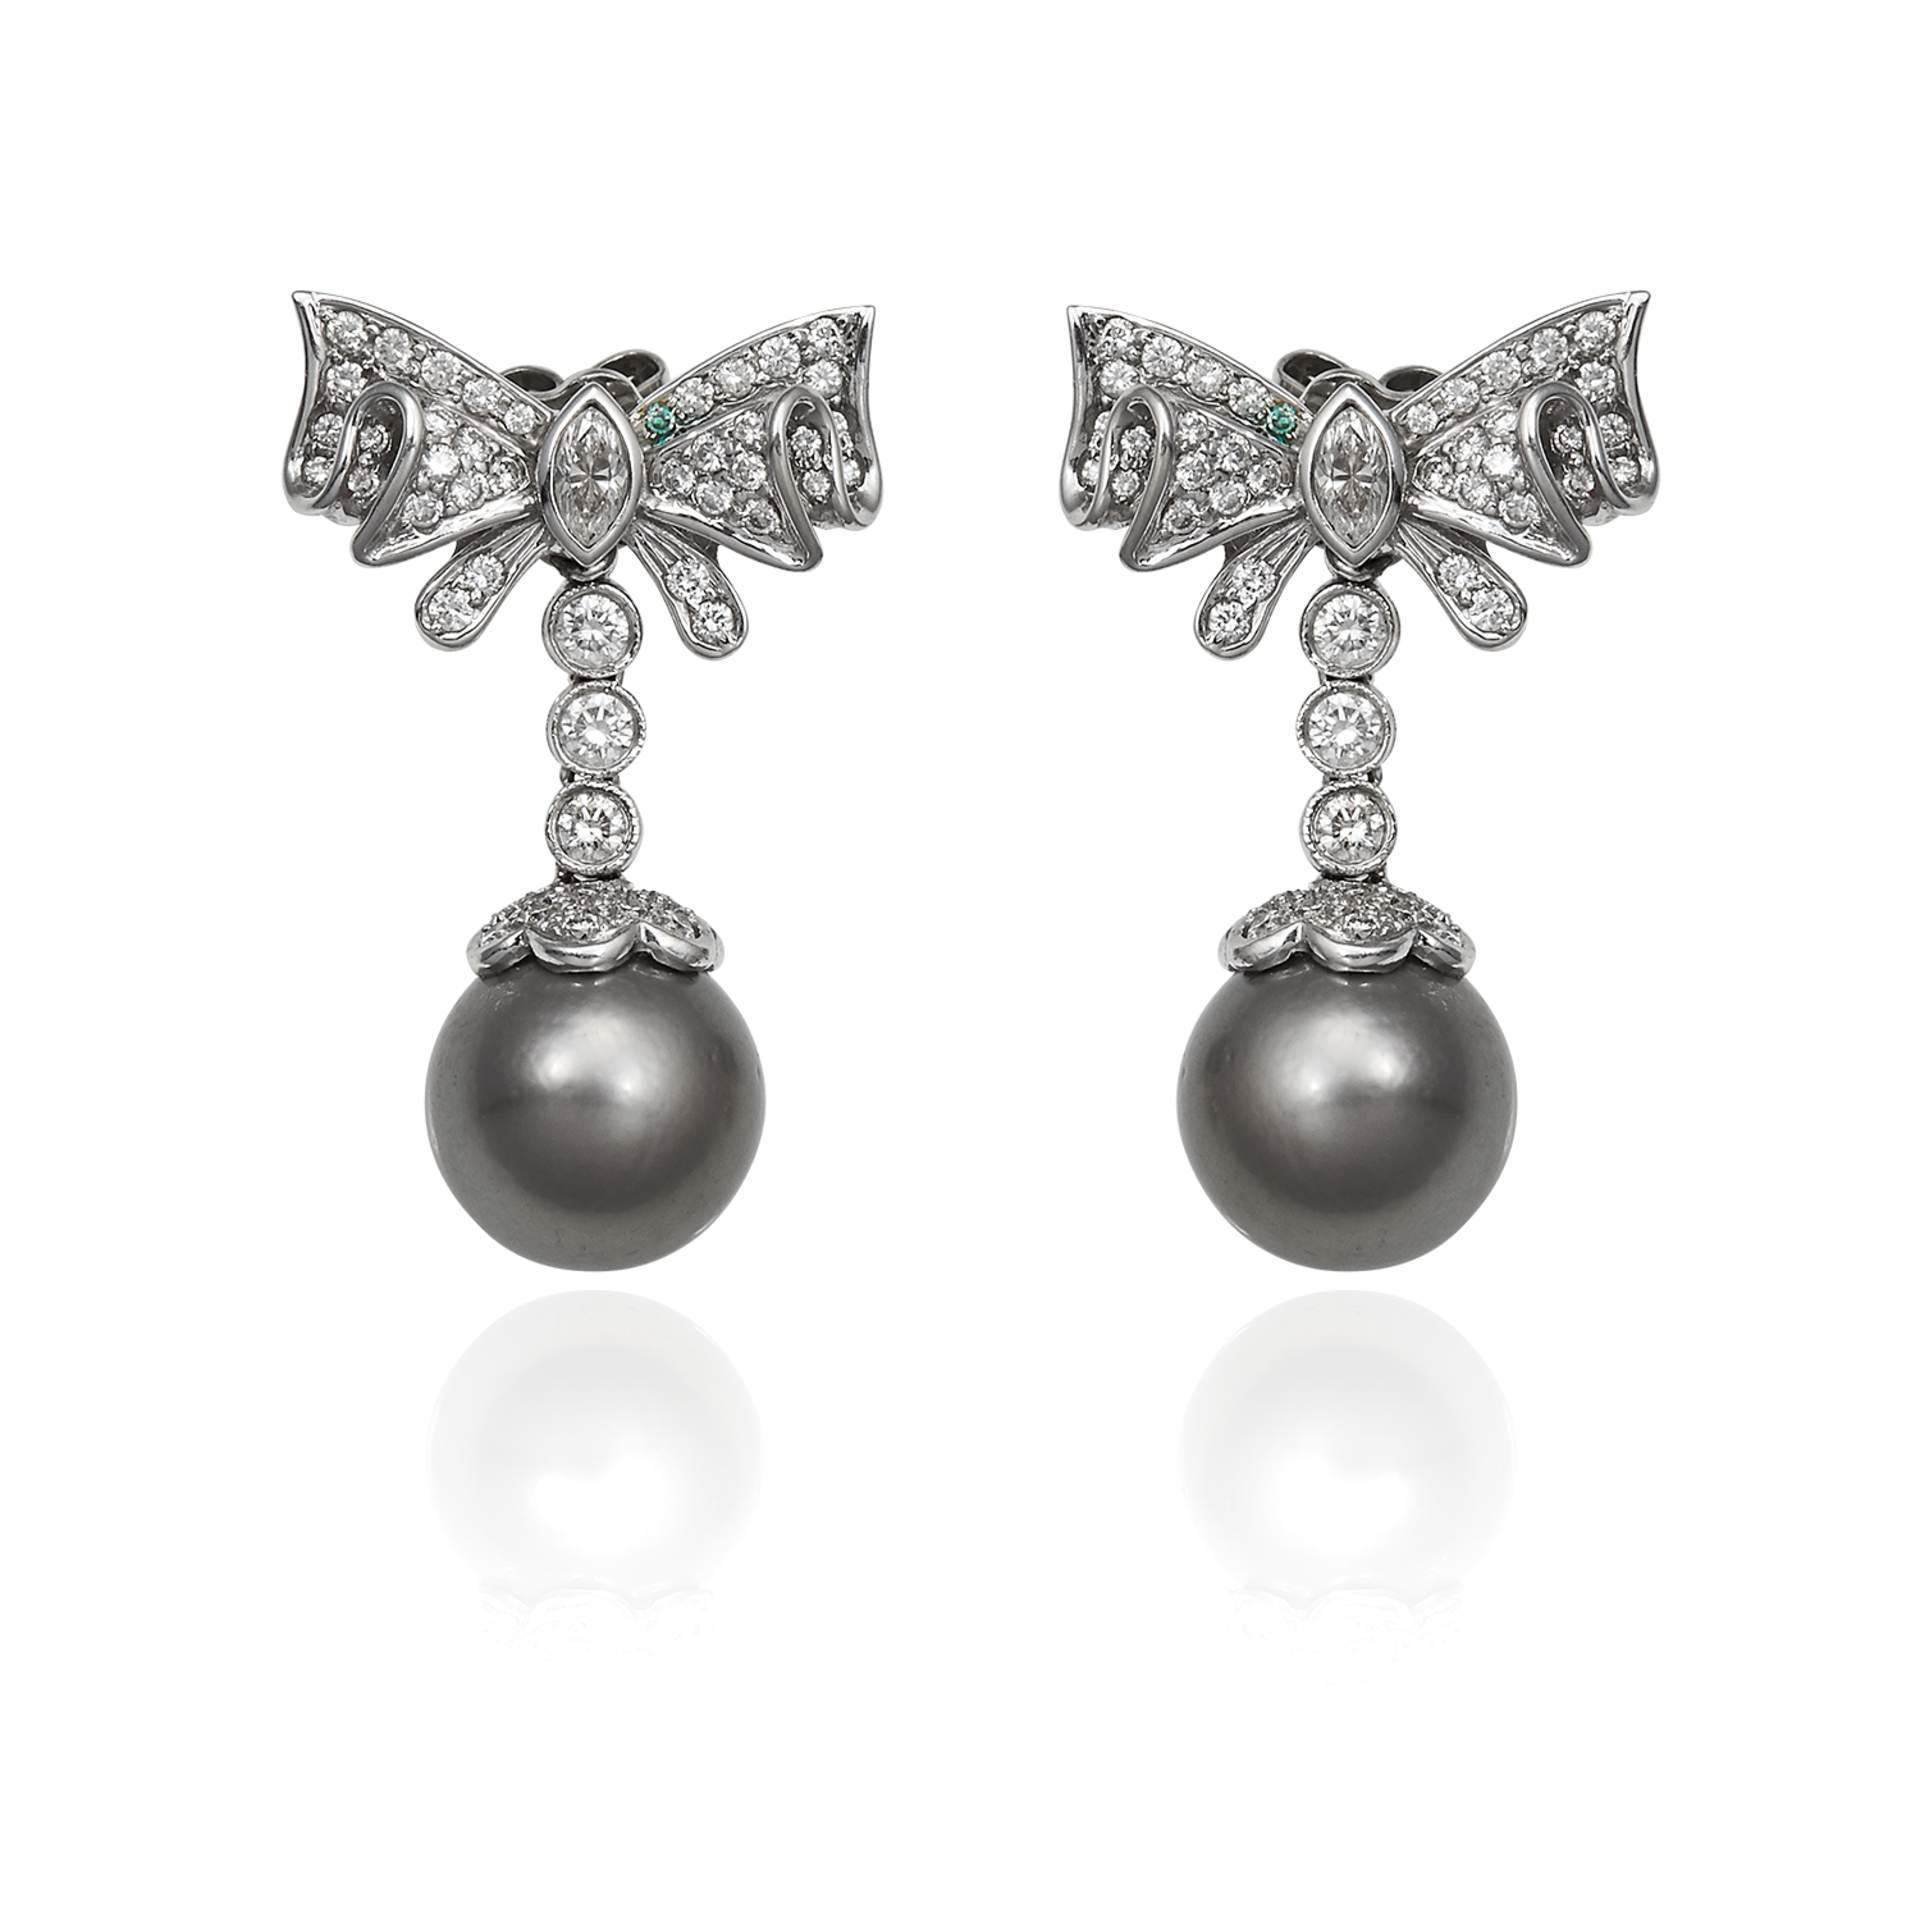 A PEARL AND DIAMOND EARRING AND PENDANT SUITE in 18ct white gold, the pendant set with a pearl of